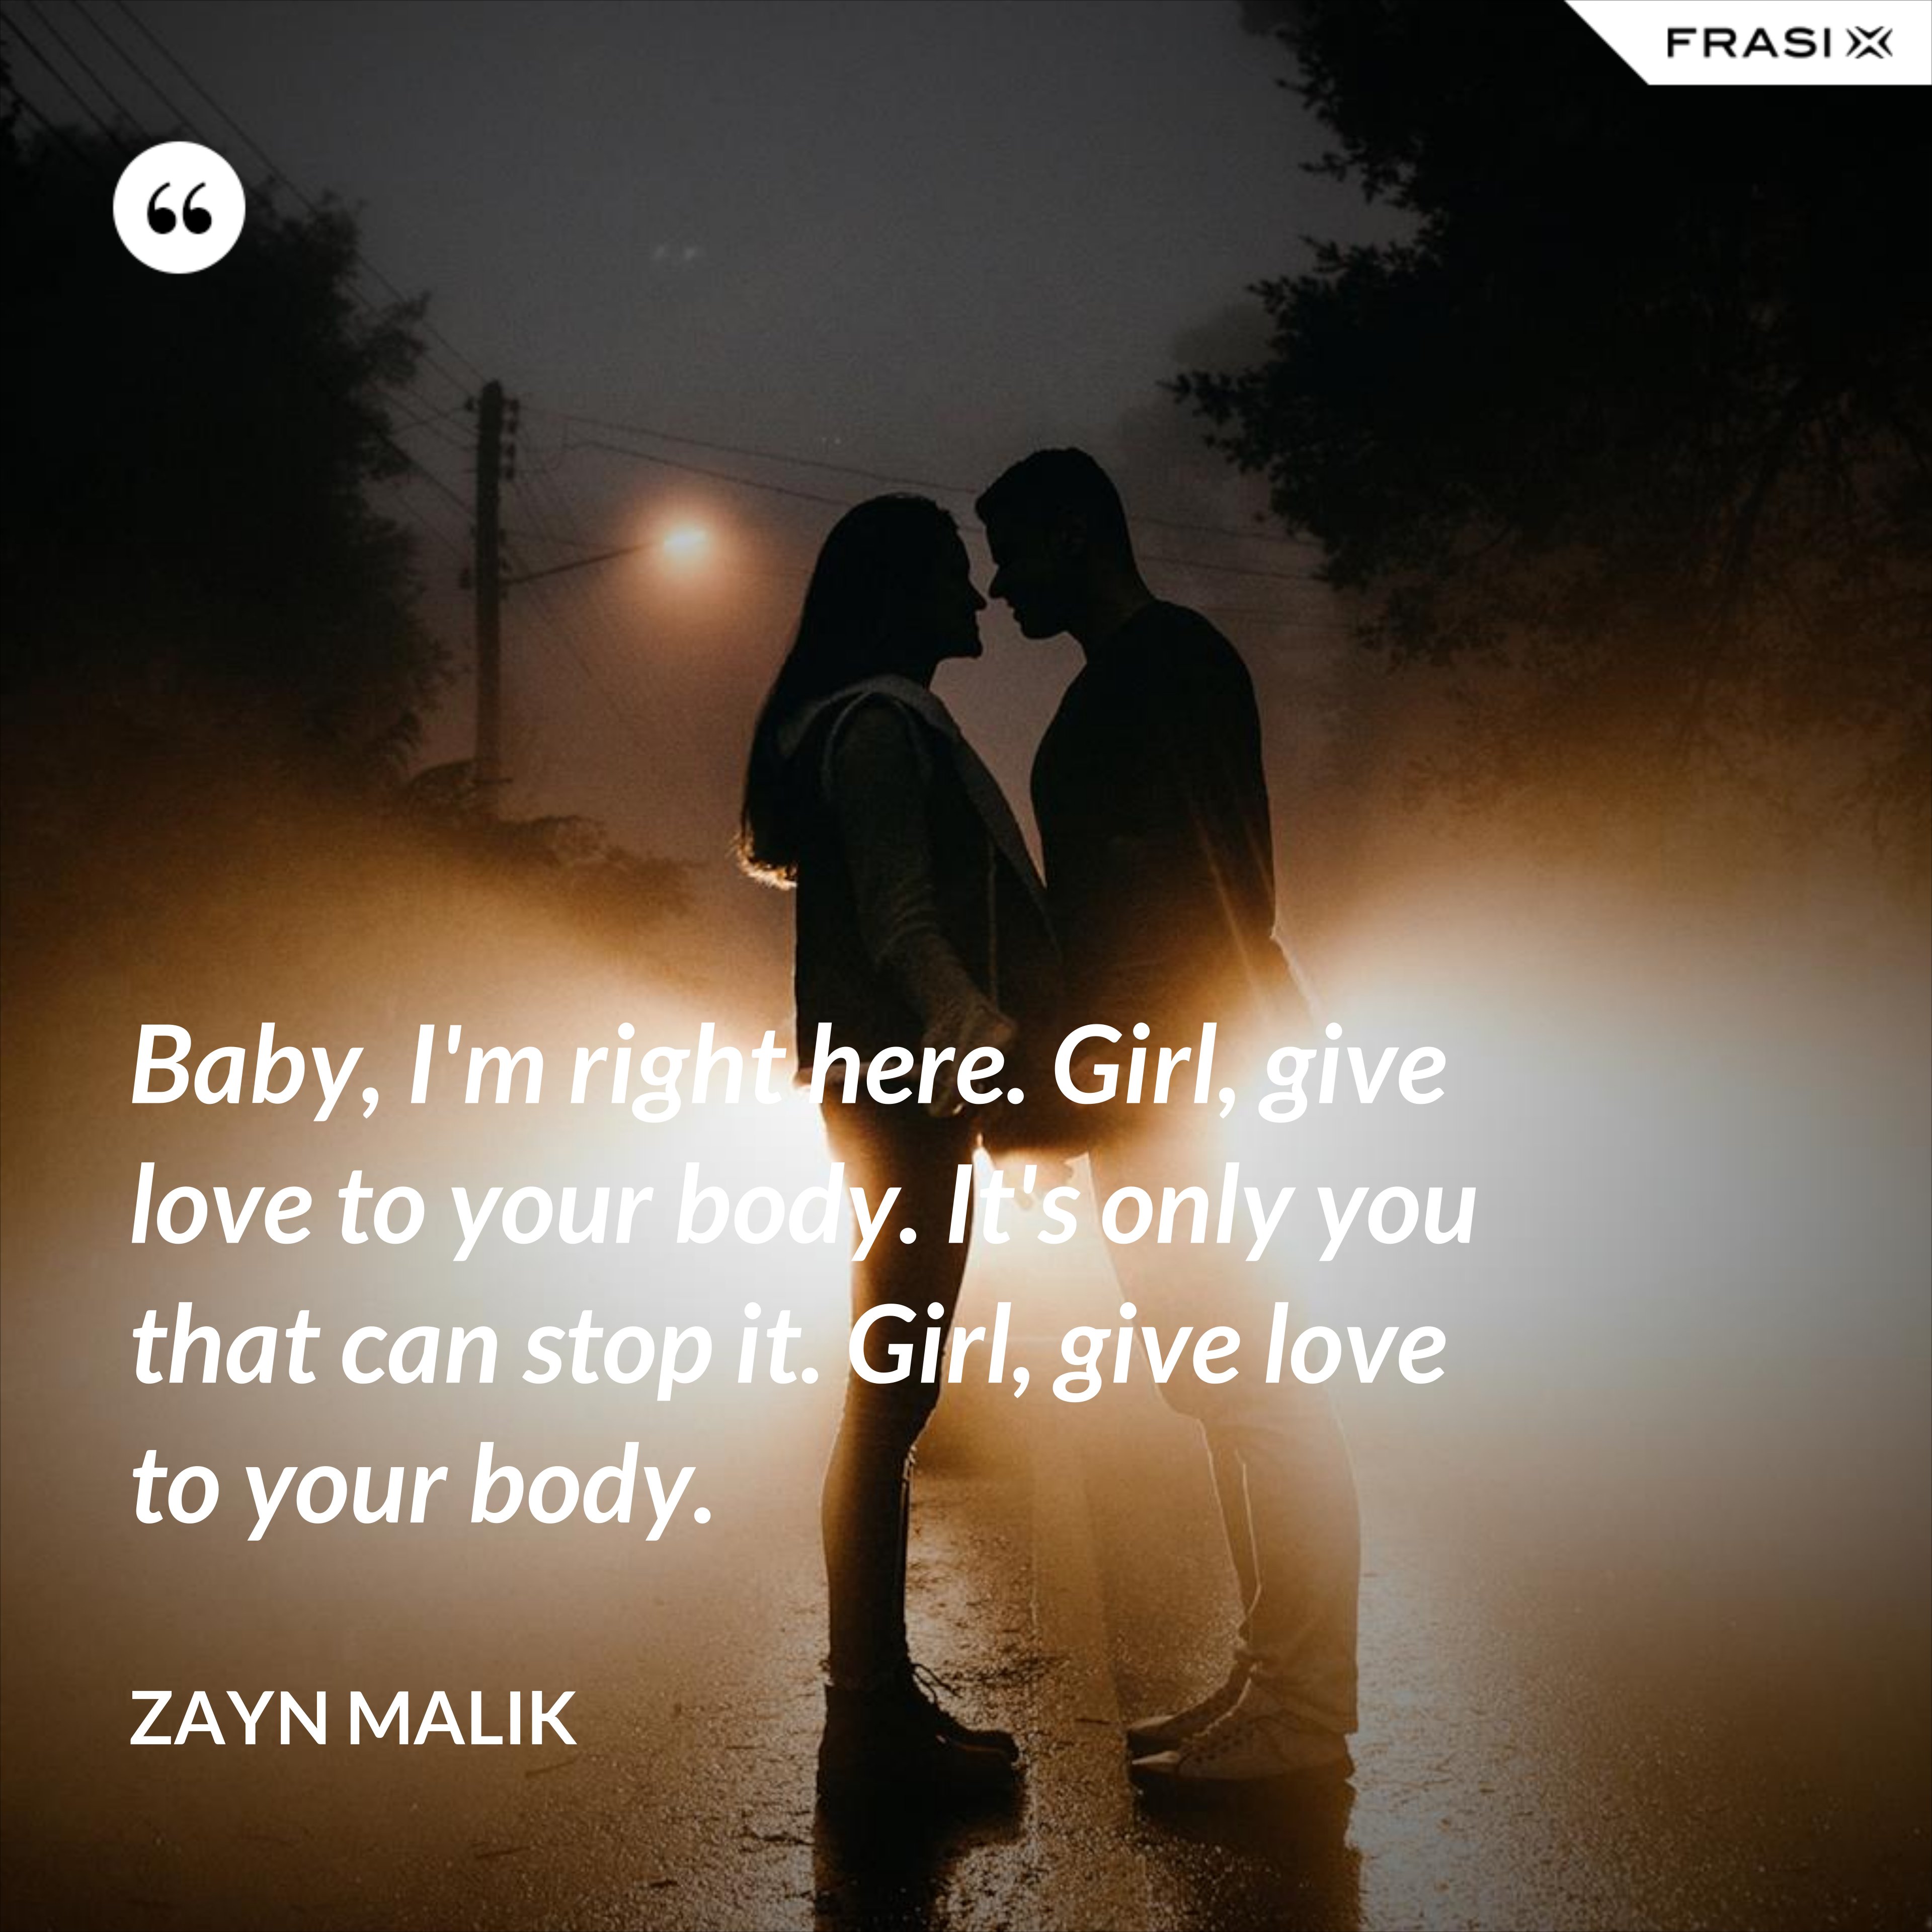 Baby, I'm right here. Girl, give love to your body. It's only you that can stop it. Girl, give love to your body. - Zayn Malik